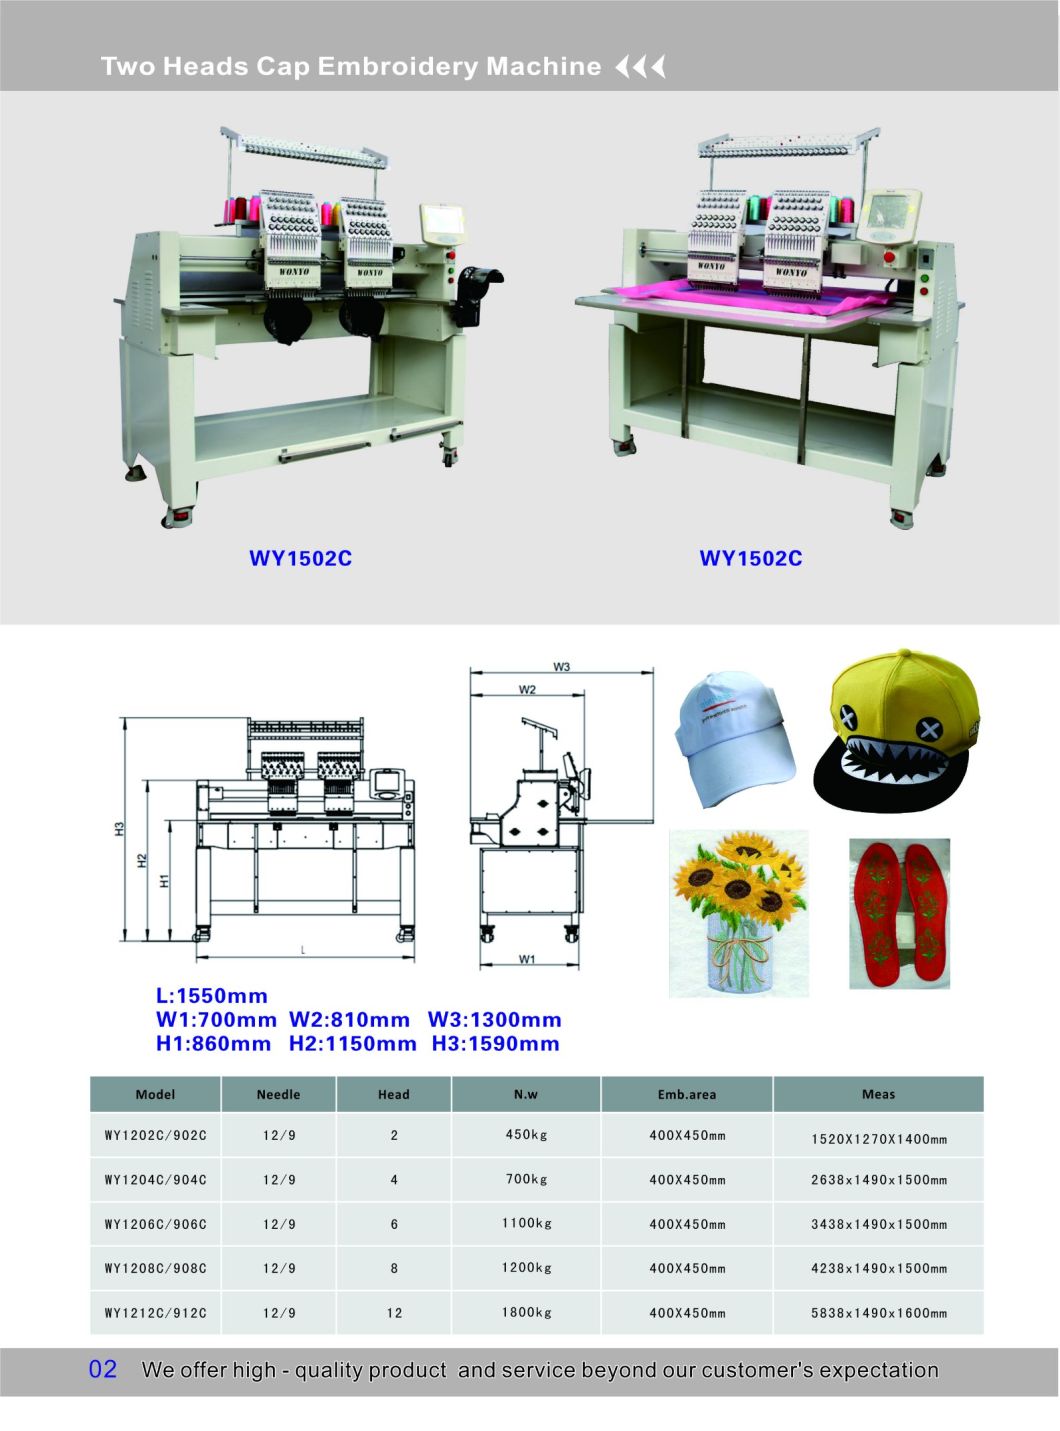 8 Head Cap Industrial Embroidery Machine Price for Sale